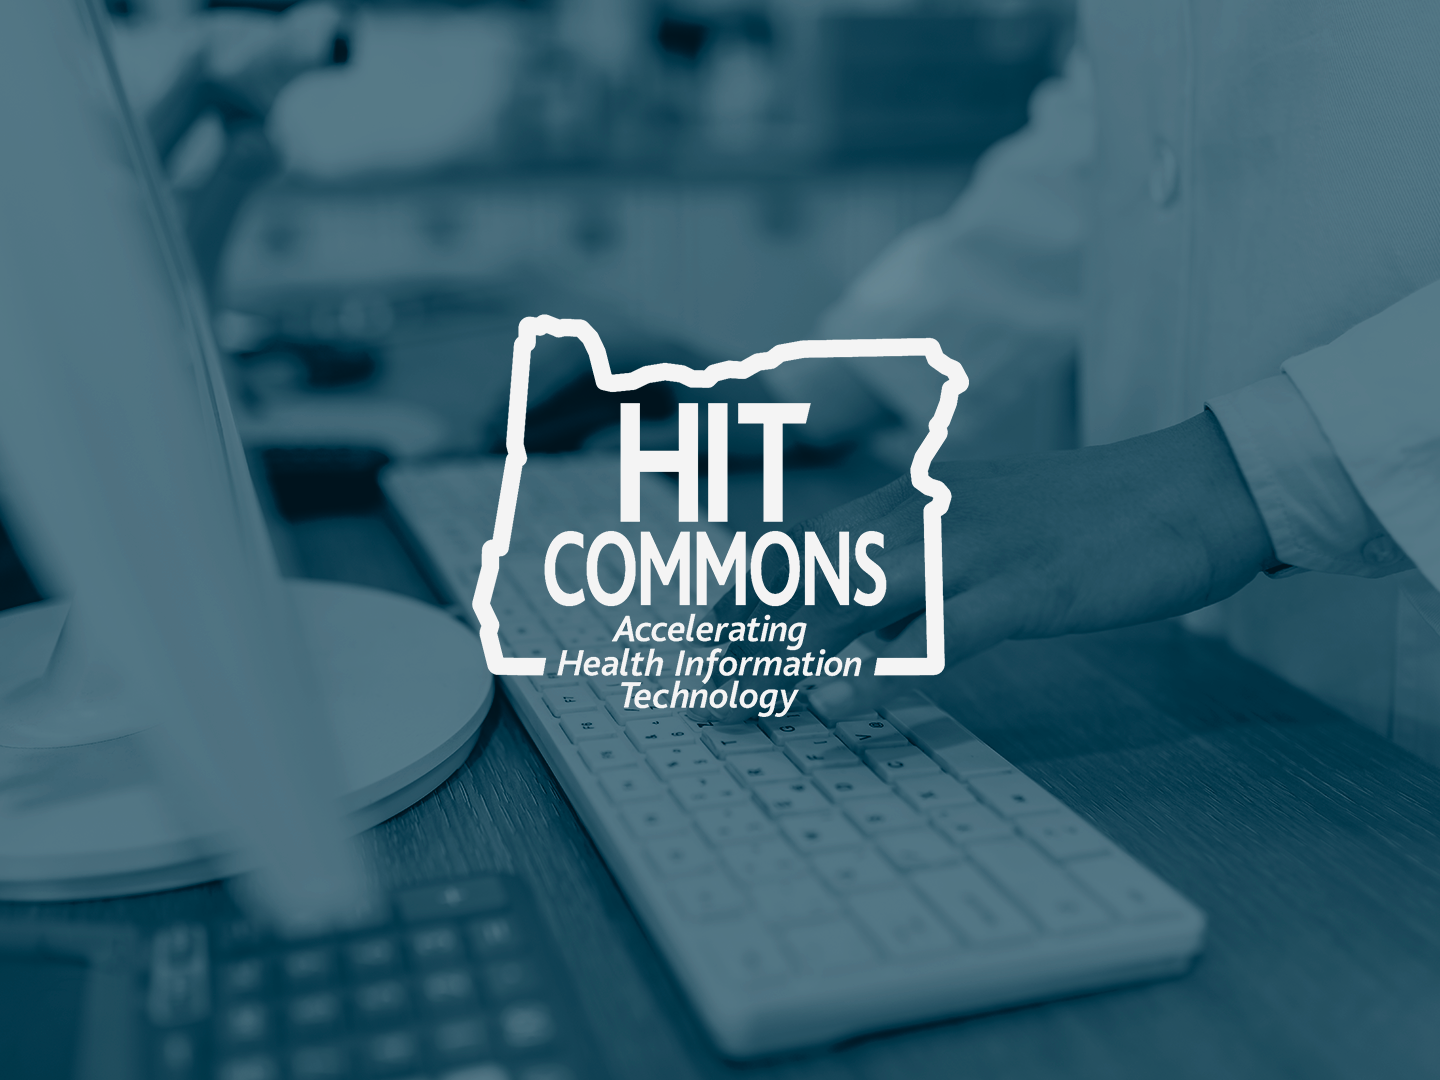 HIT Commons logo with person at keyboard as background.